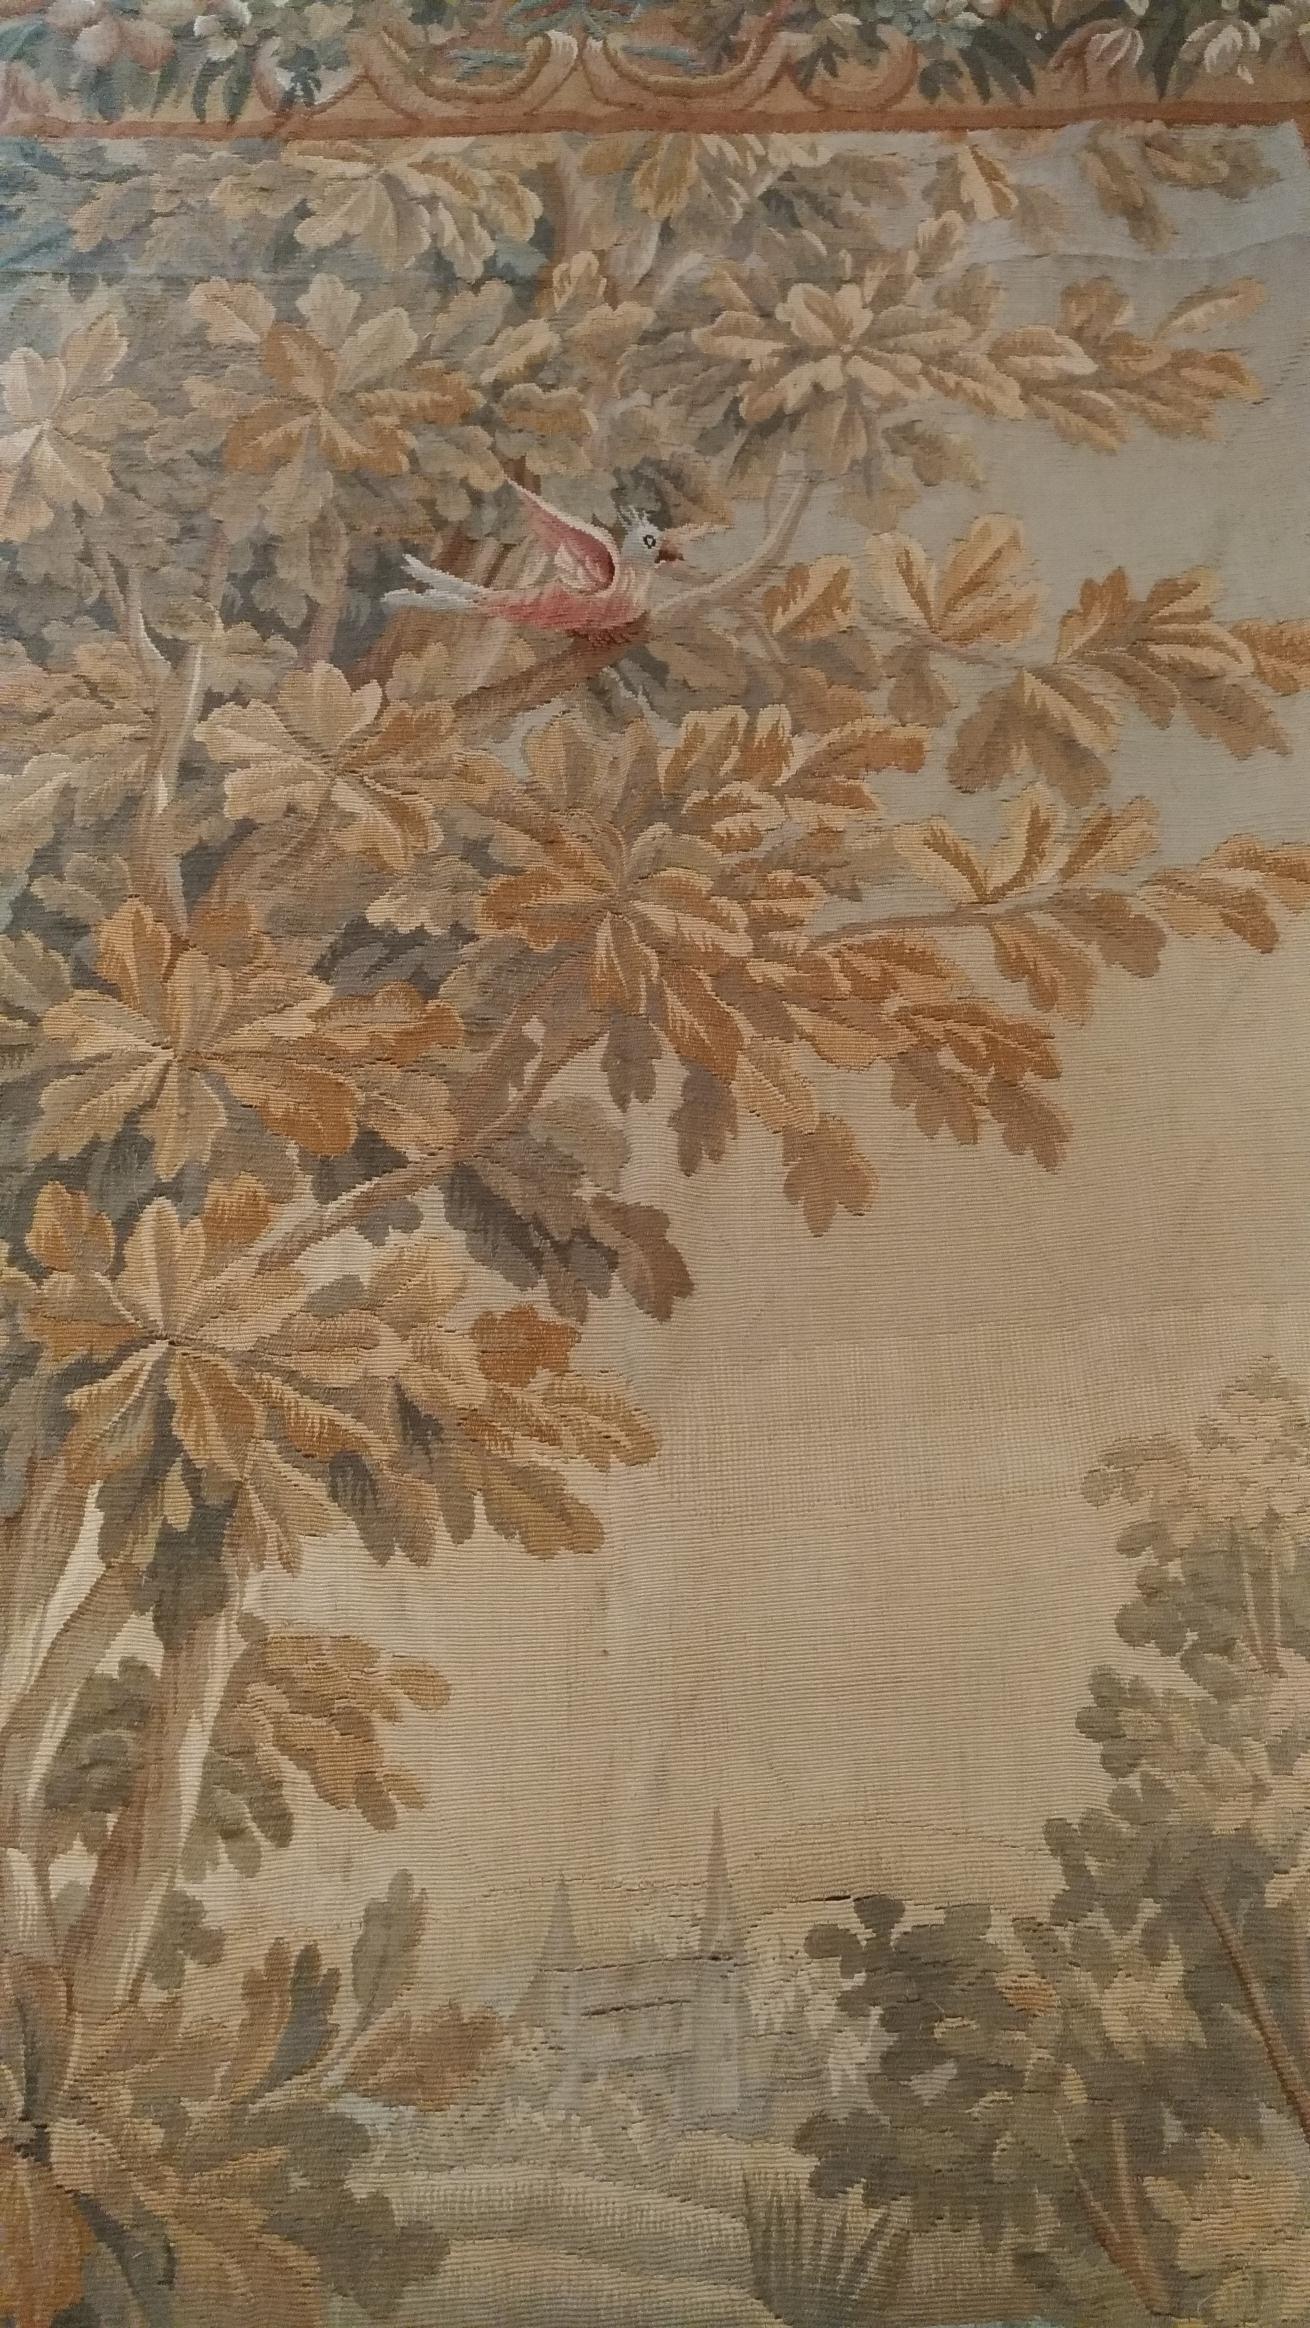 1039 - Beautiful French Aubusson Tapestry from the End of the 19th Century 4